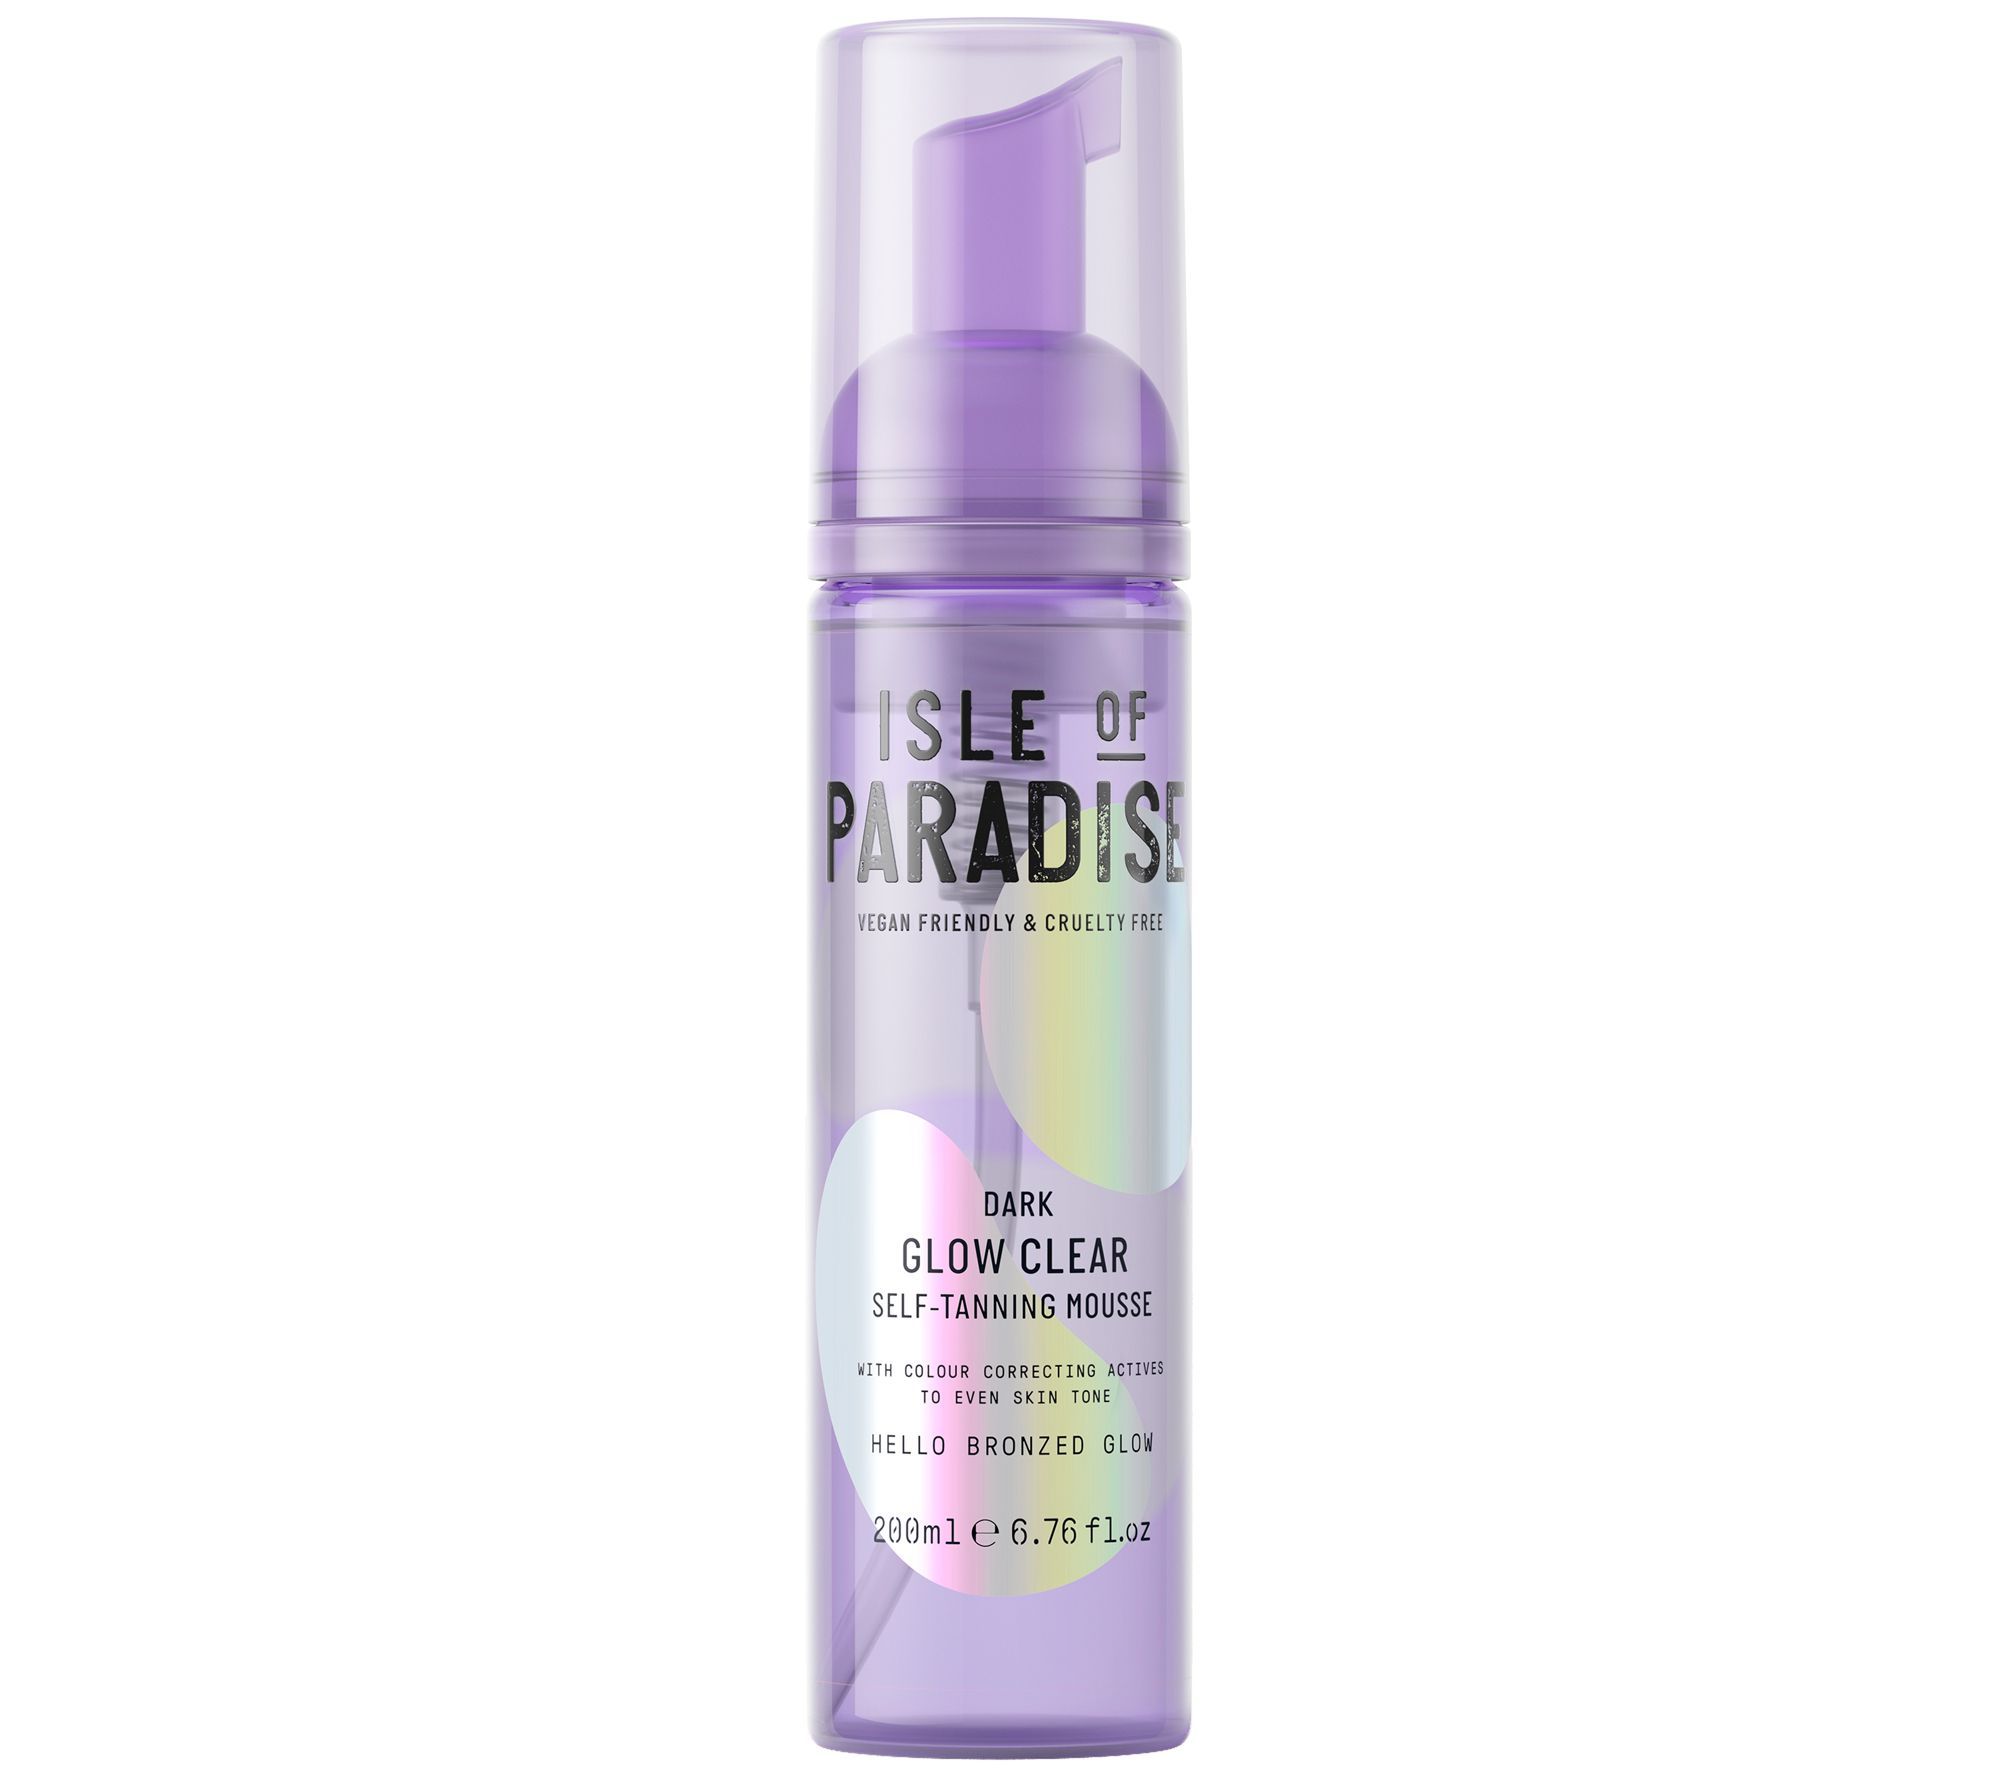 Isle of Paradise Glow Clear Self-Tanning Mousse | QVC